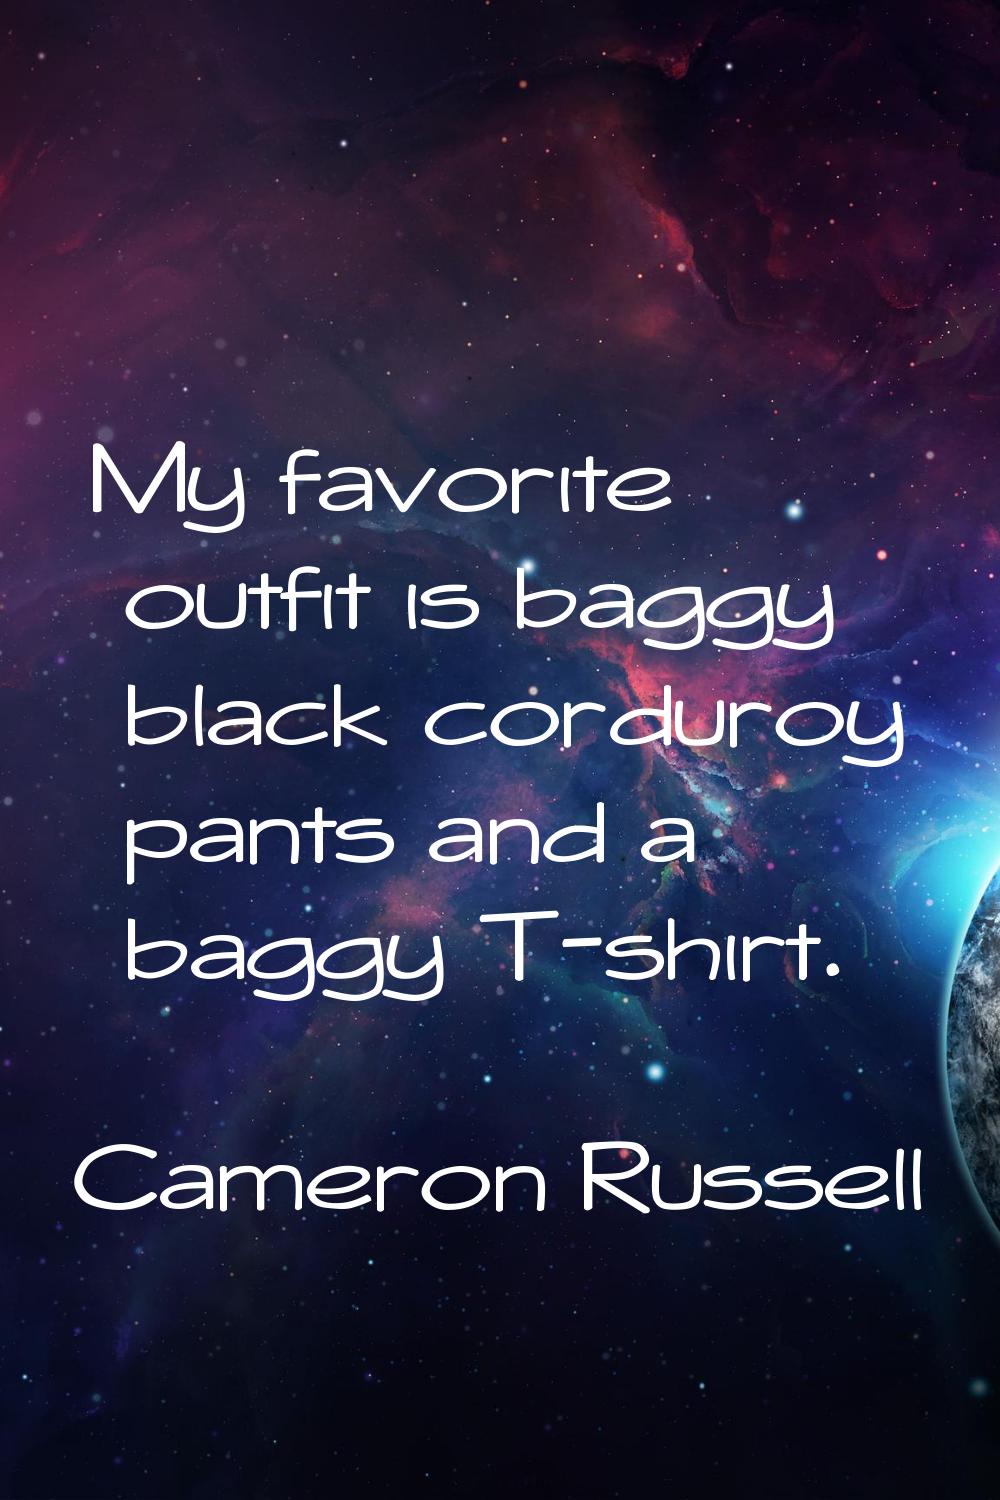 My favorite outfit is baggy black corduroy pants and a baggy T-shirt.